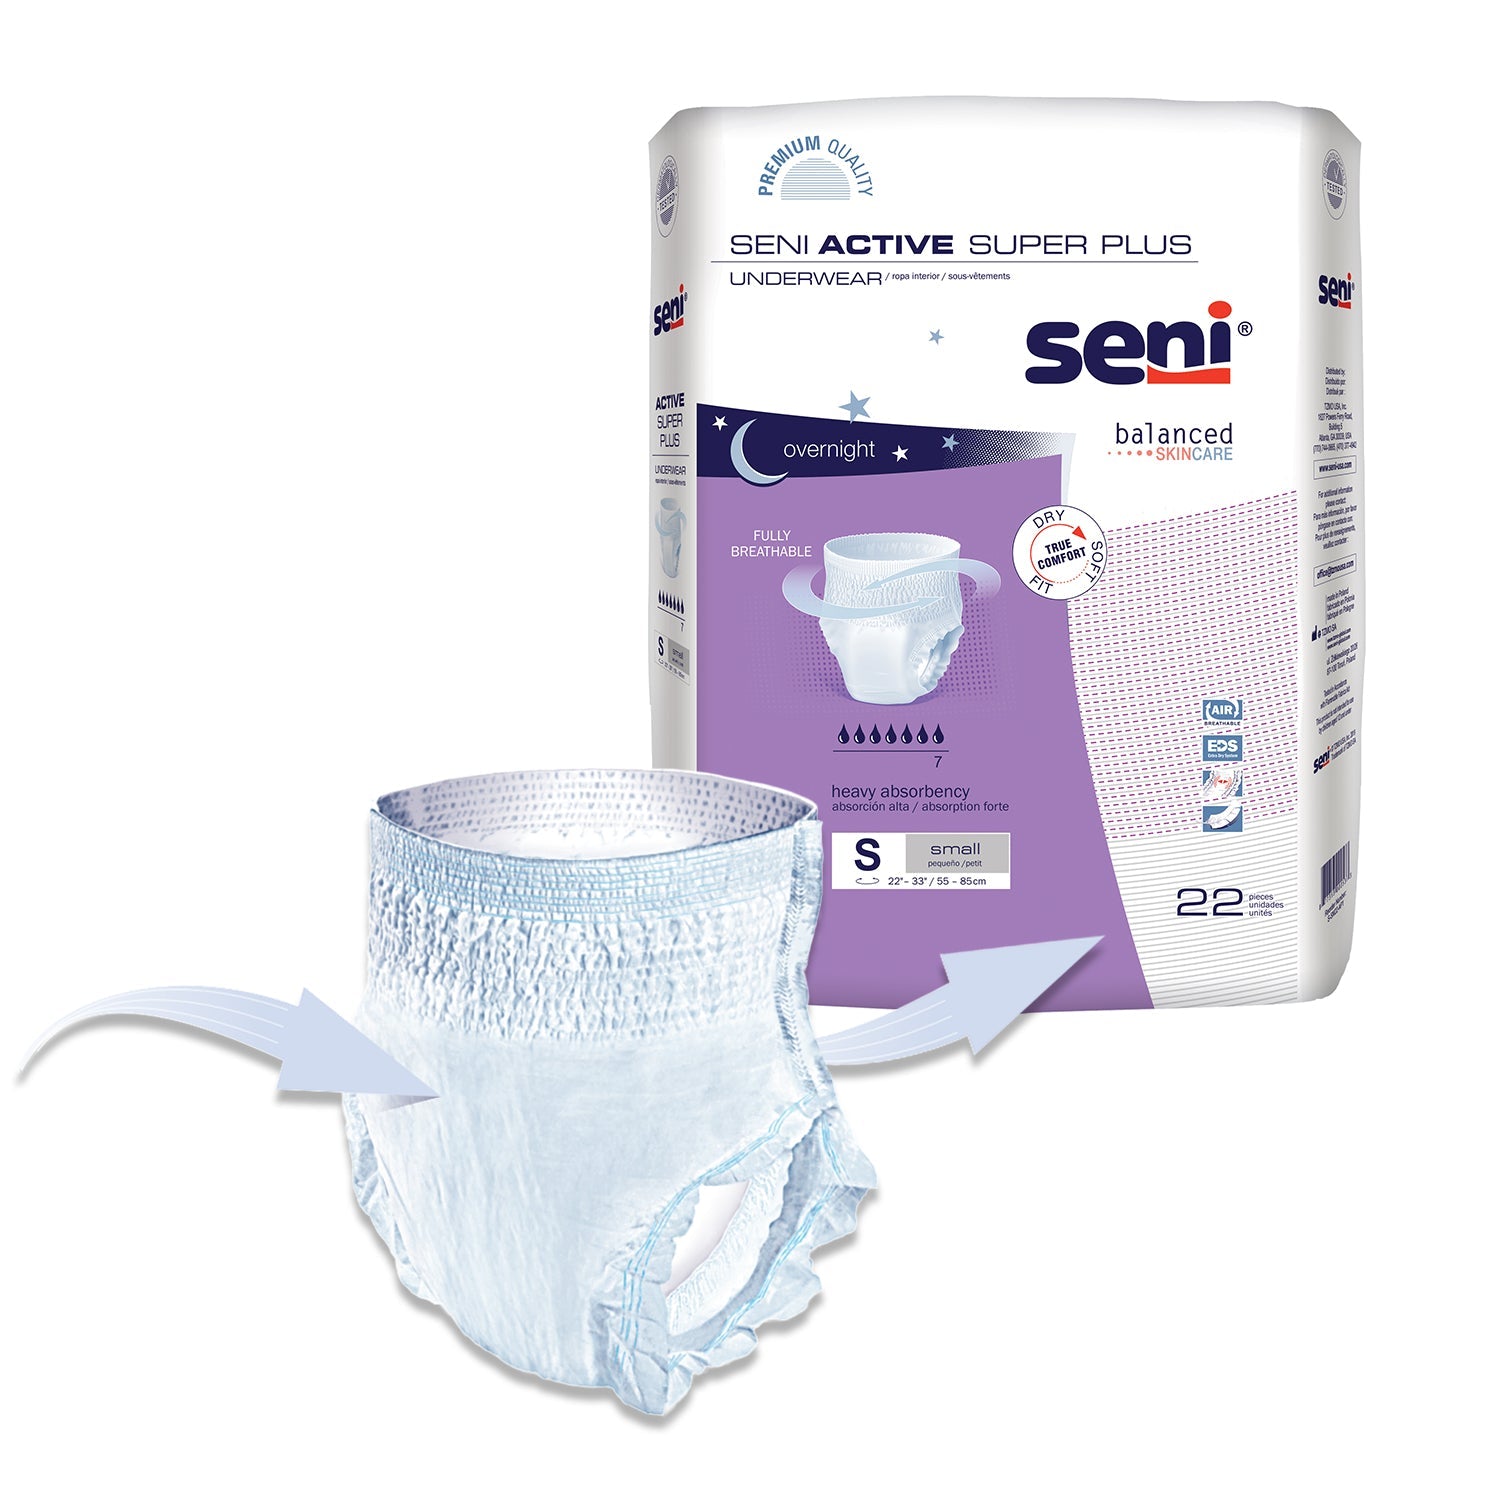 Trial Pack of Seni Active Super Plus Underwear - Small